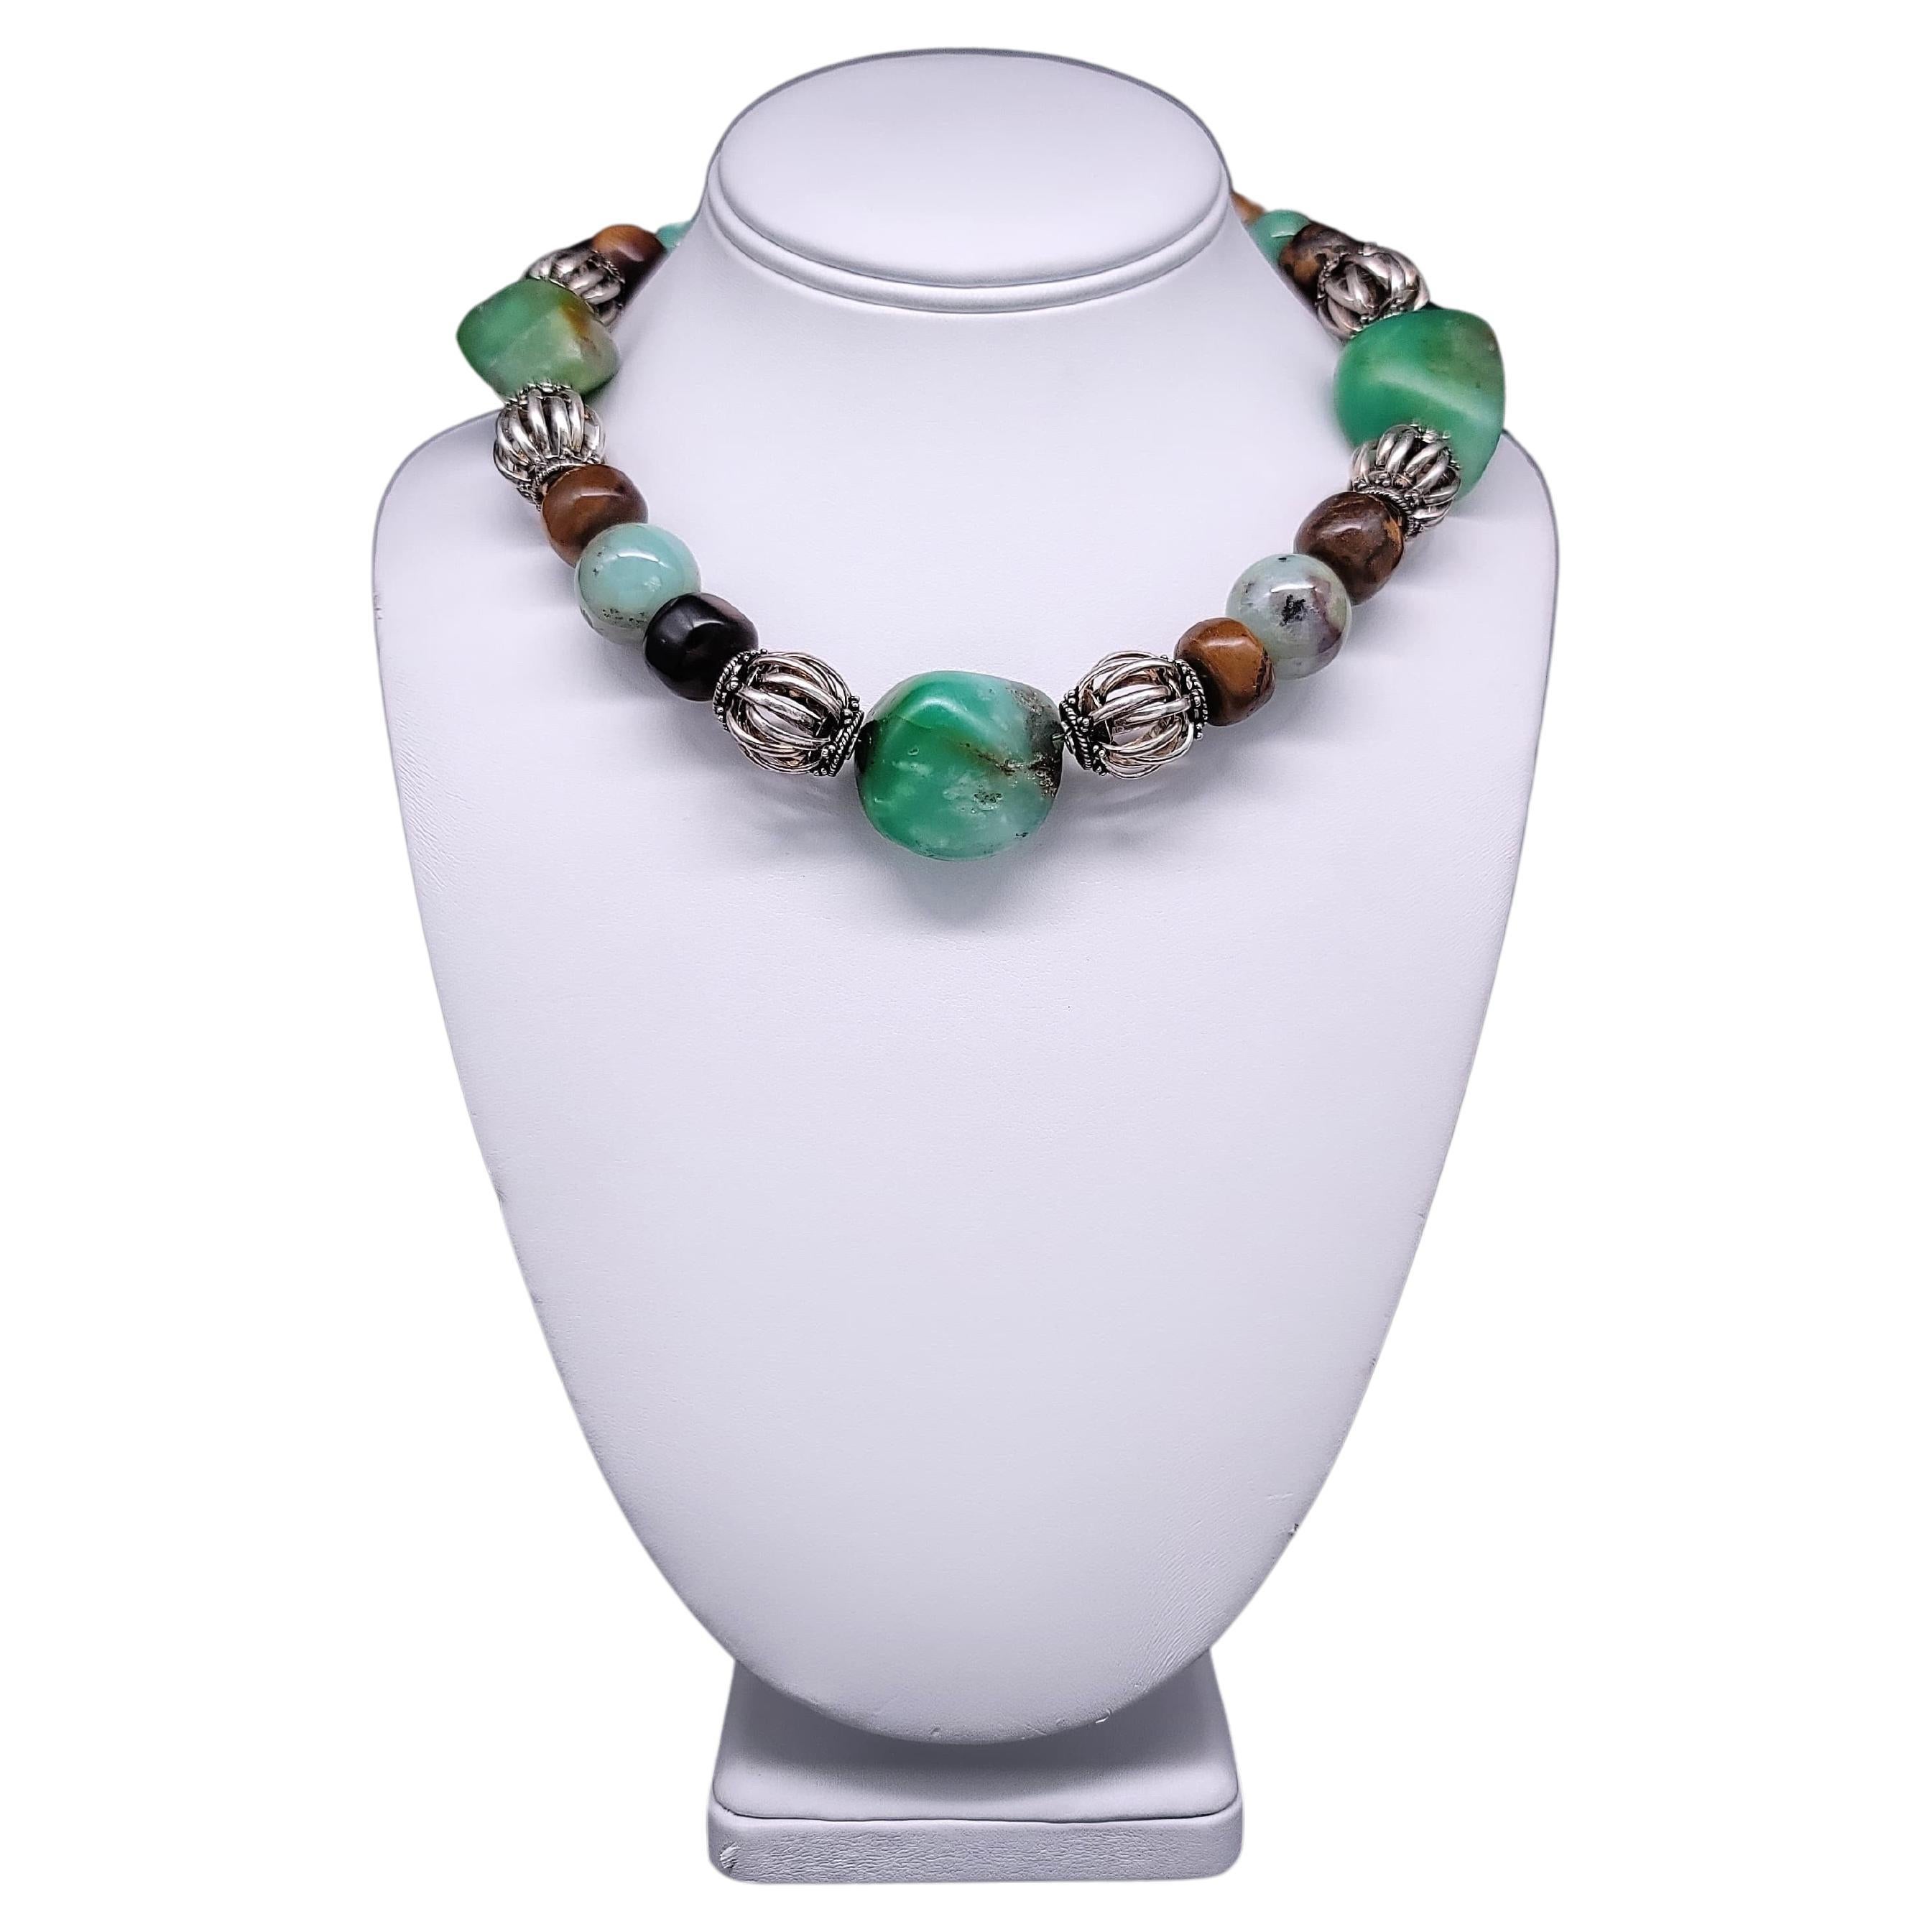 Exquisite Rarity:

Prepare to be captivated by a truly exceptional creation that stands alone in its uniqueness. At its heart, an extraordinary large opaque green polished Chrysoprase center stone takes the spotlight, its vibrant beauty a testament